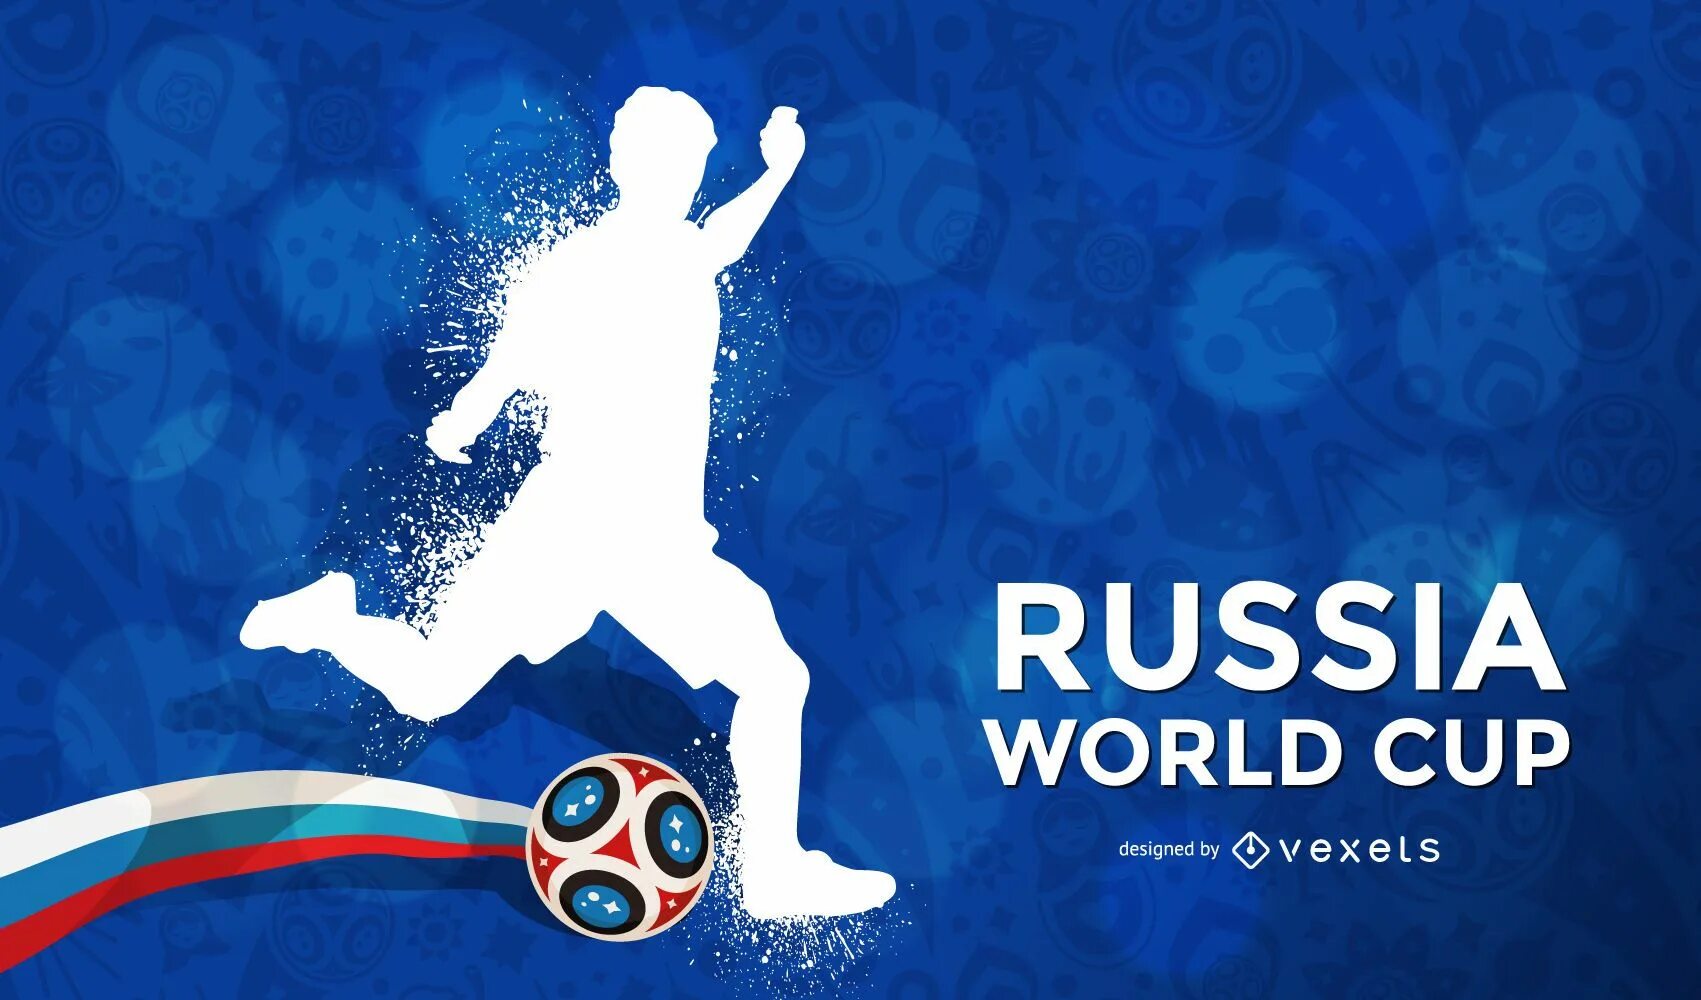 World Cup фон. World Cup background. World Cup 2018 background. Футбол фон вектор.